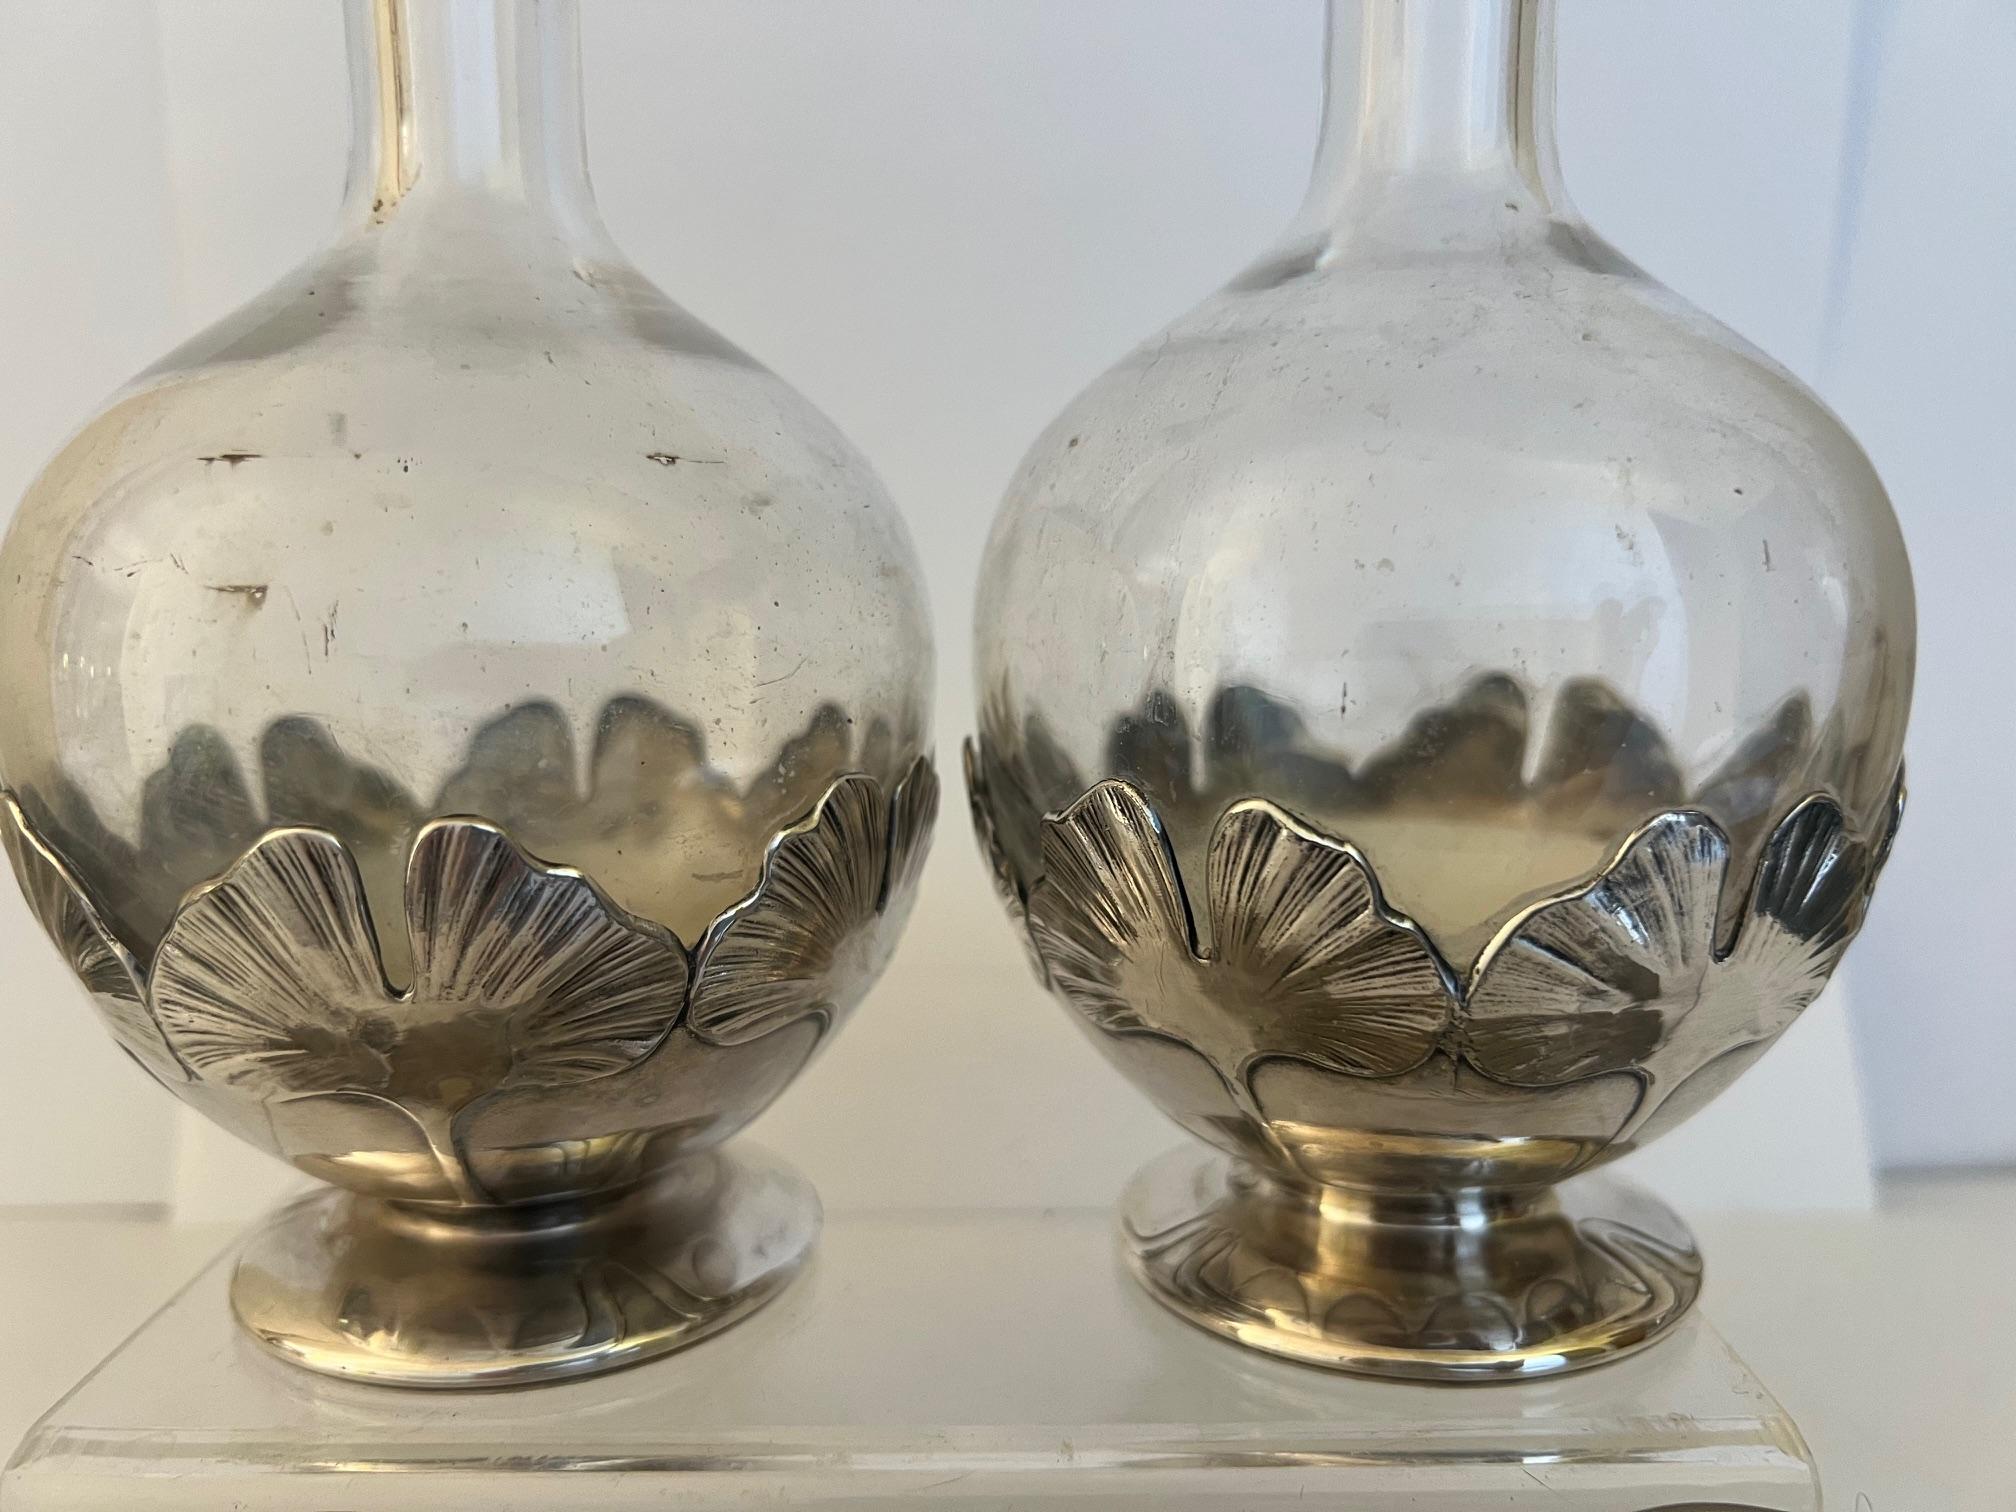 Early 20th Century Christofle Art Nouveau Decanter and Glass Set of 8 For Sale 7